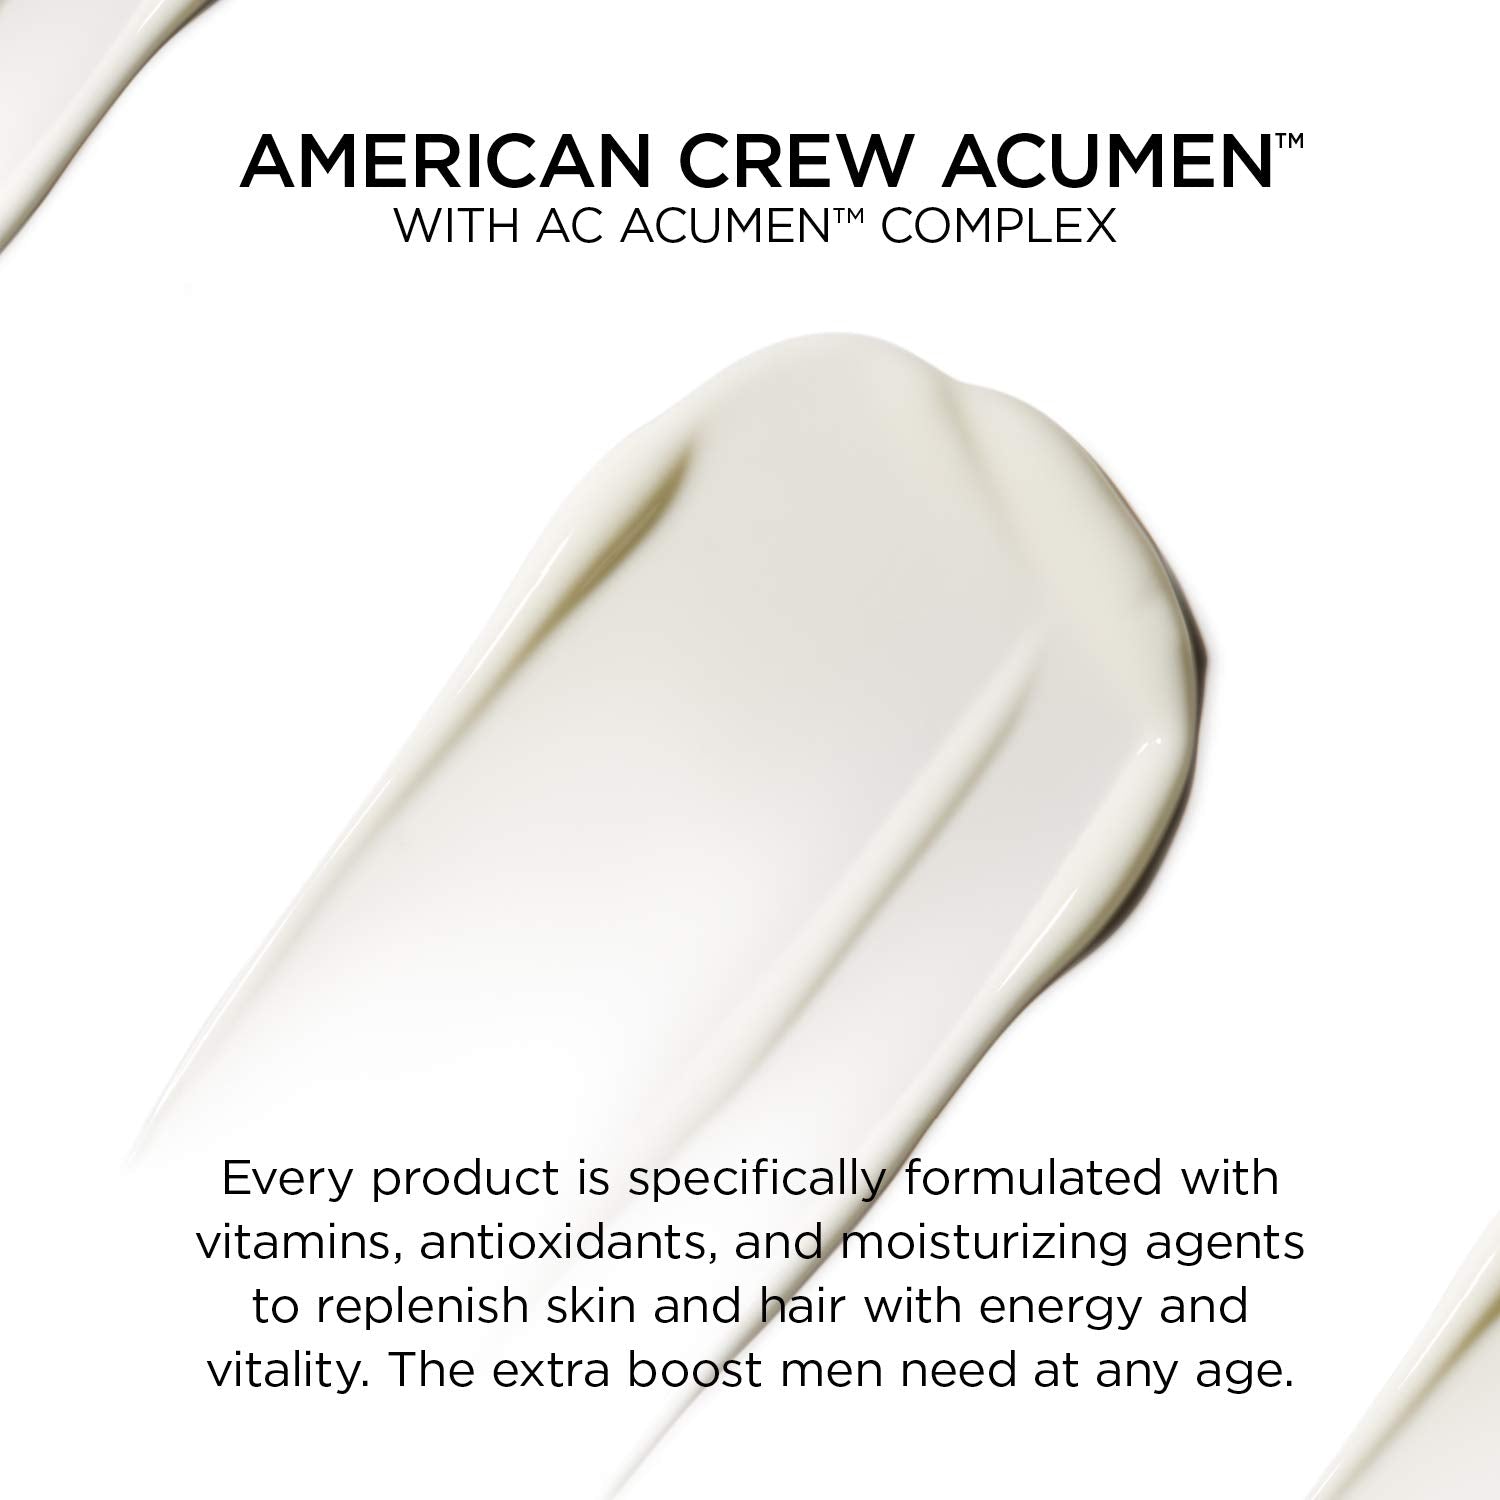 American Crew Men's Body Wash, Acumen with Cranberry Extract, Gently Cleanses Skin, 9.8 Fl Oz : Beauty & Personal Care